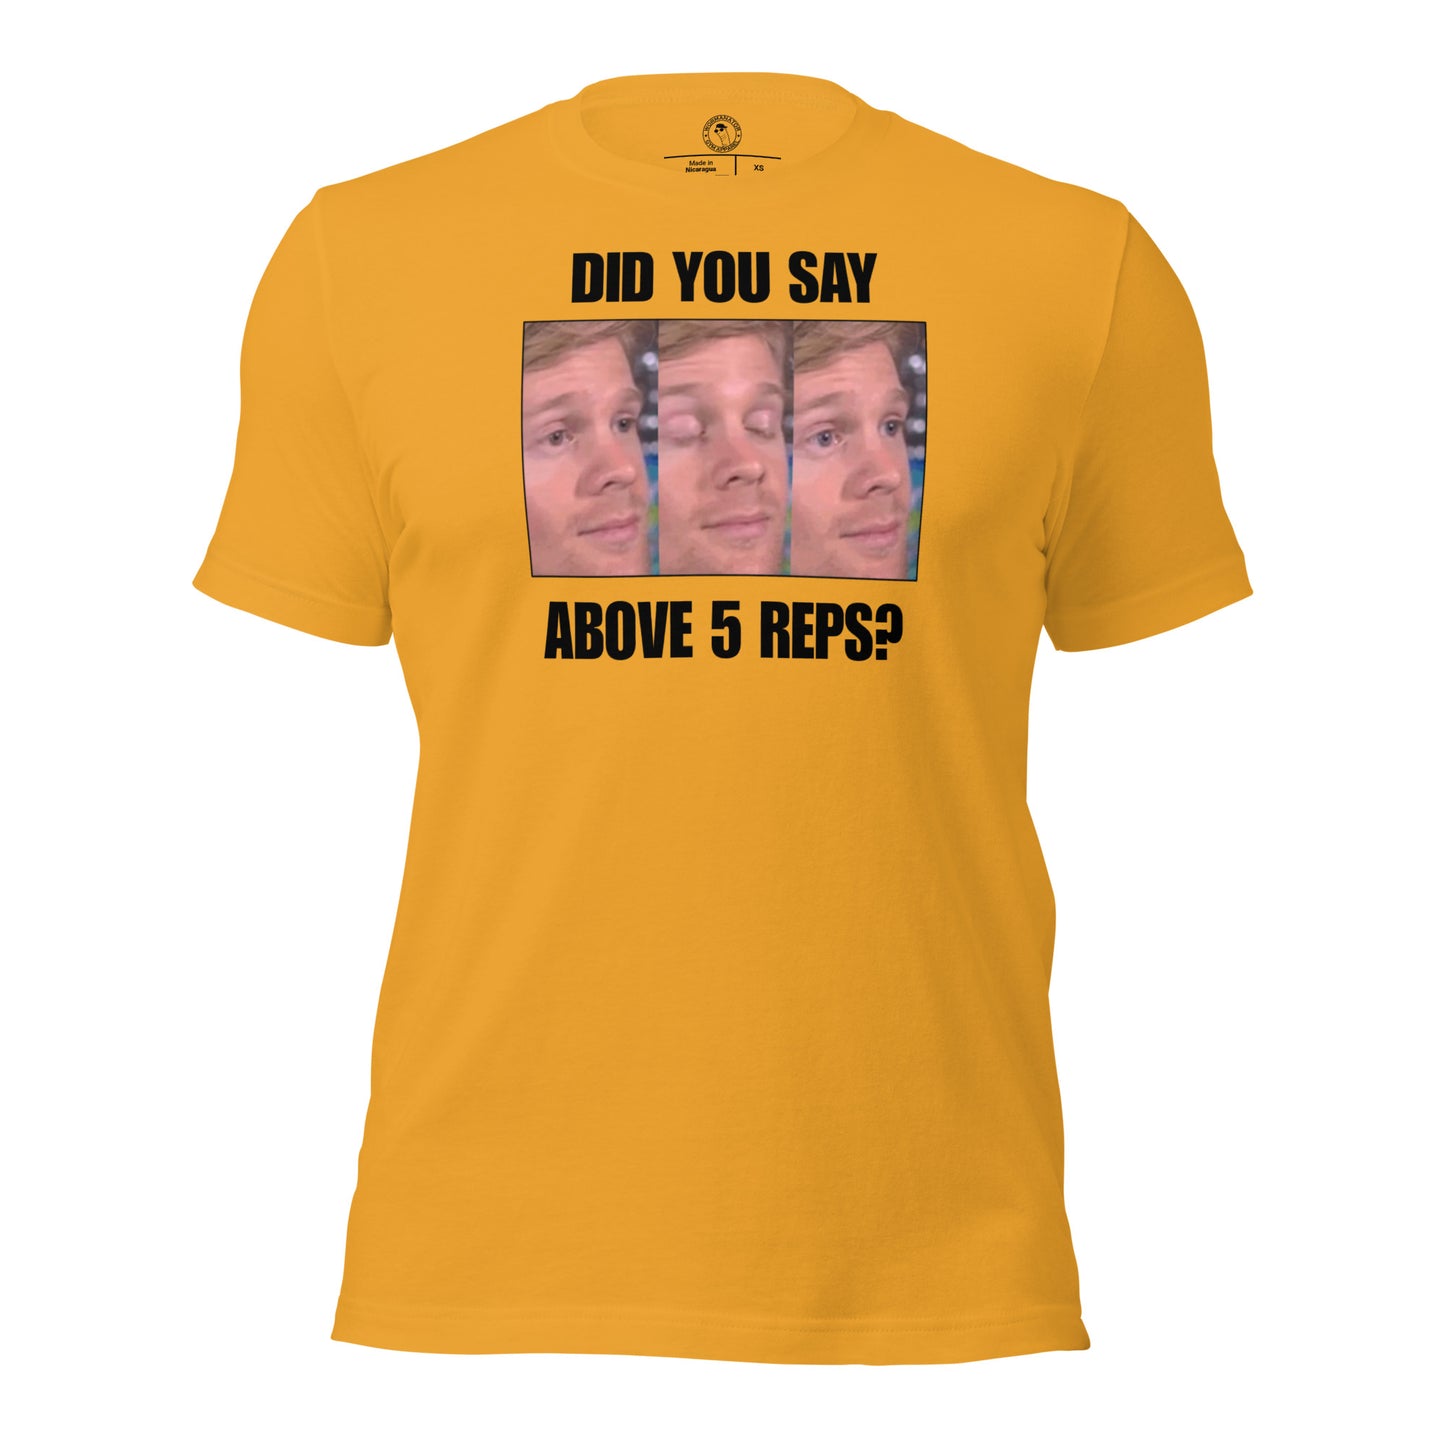 Above 5 Reps is Cardio Shirt in Mustard